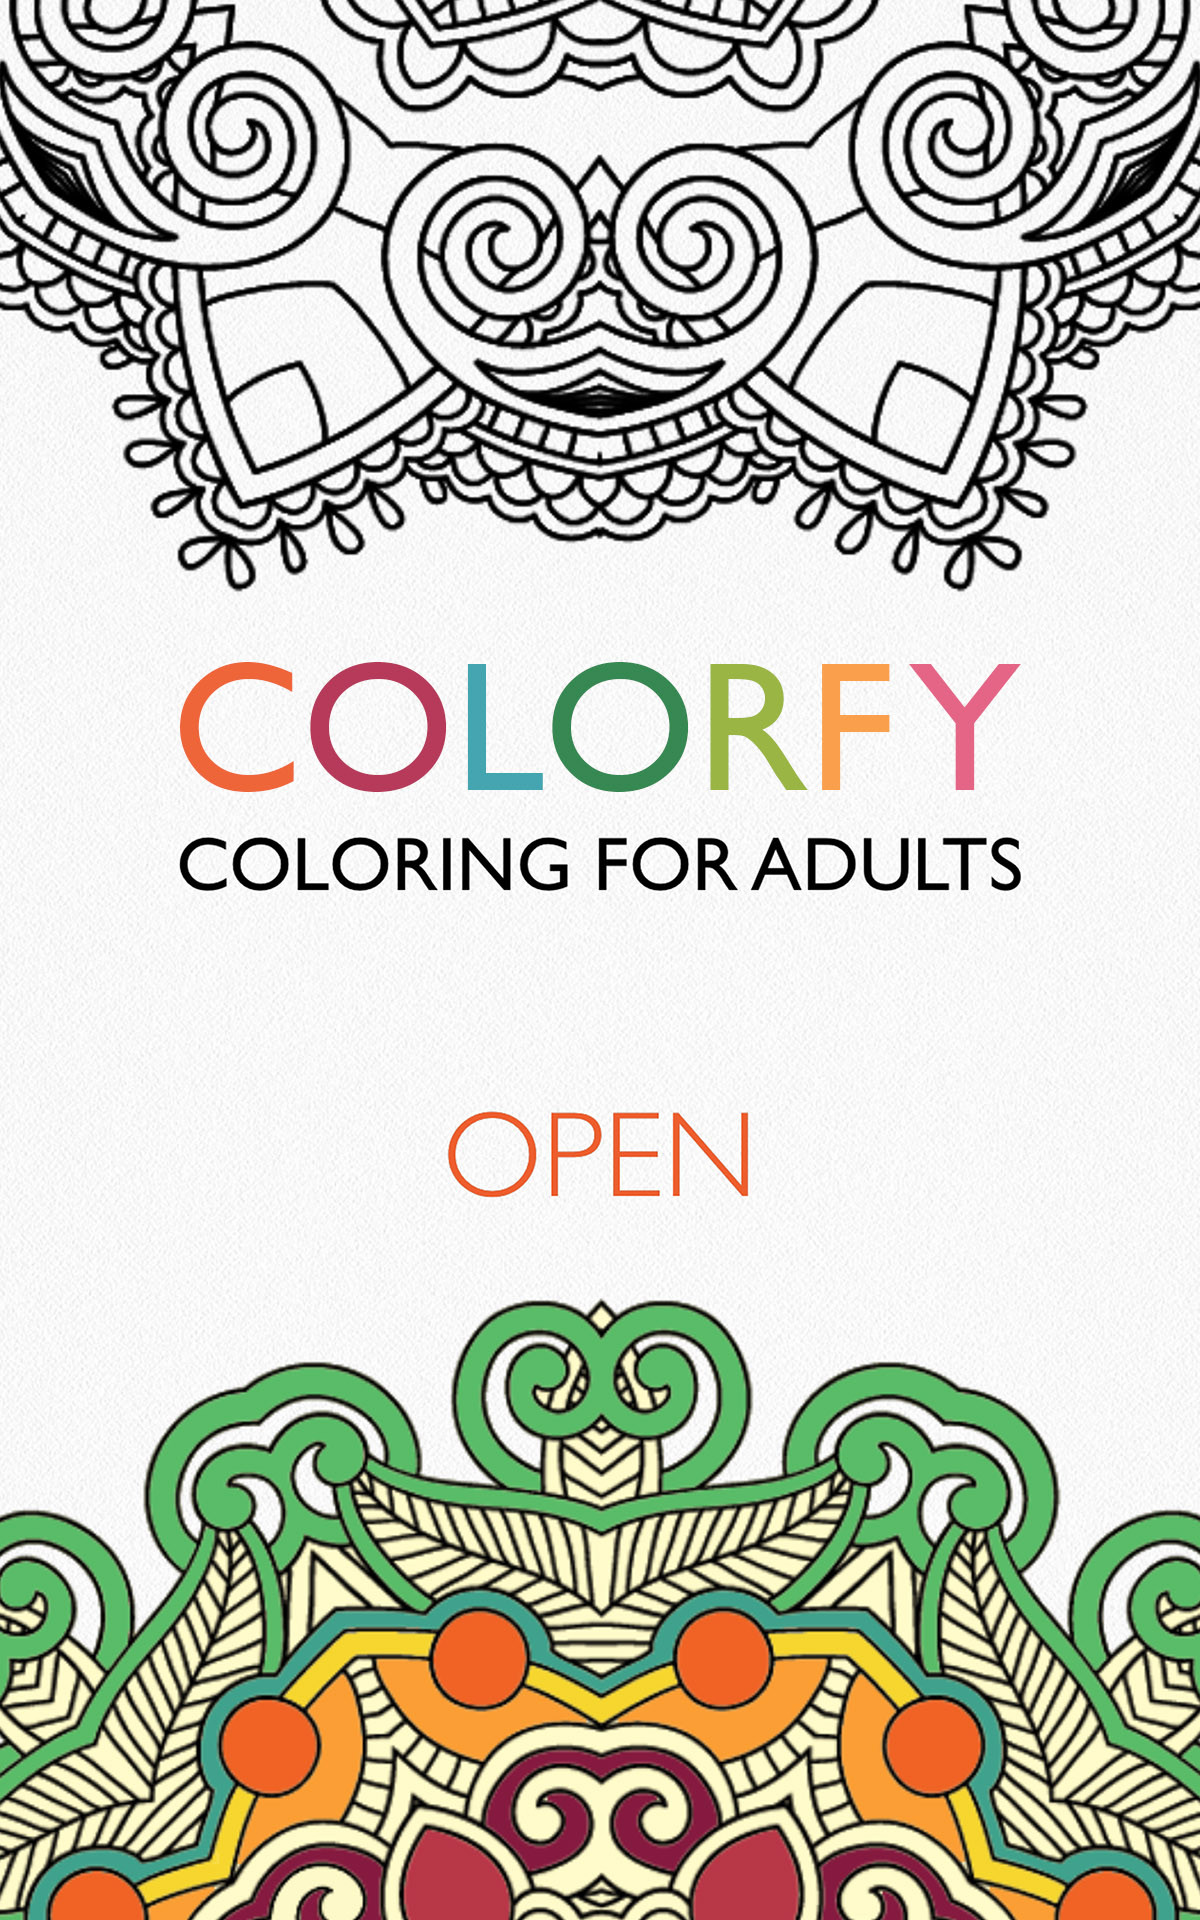 Coloring Book App For Adults
 Amazon Colorfy Coloring Book for Adults Free